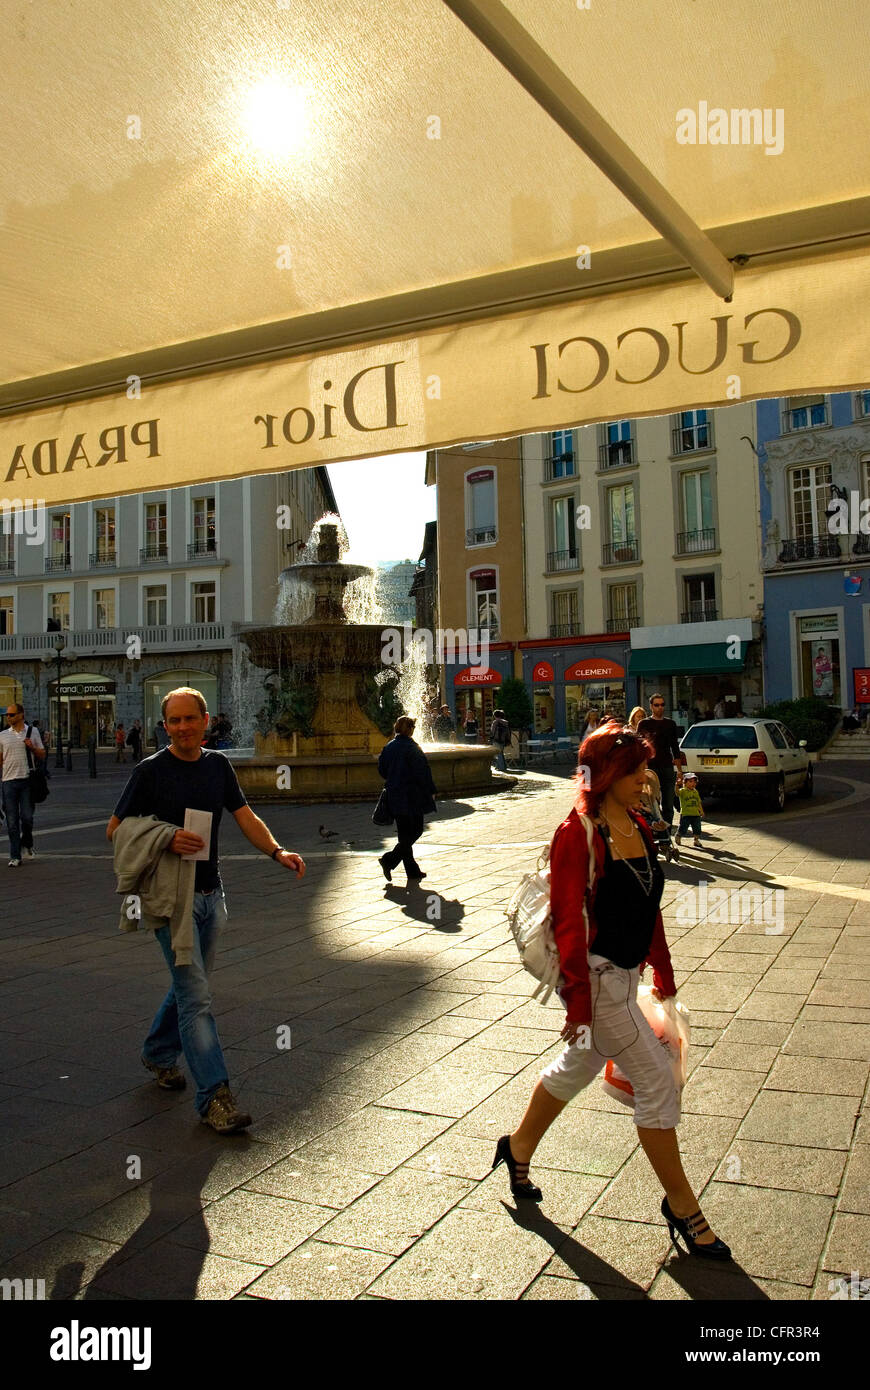 Shopping in downtown Grenoble's busy streets. Stock Photo